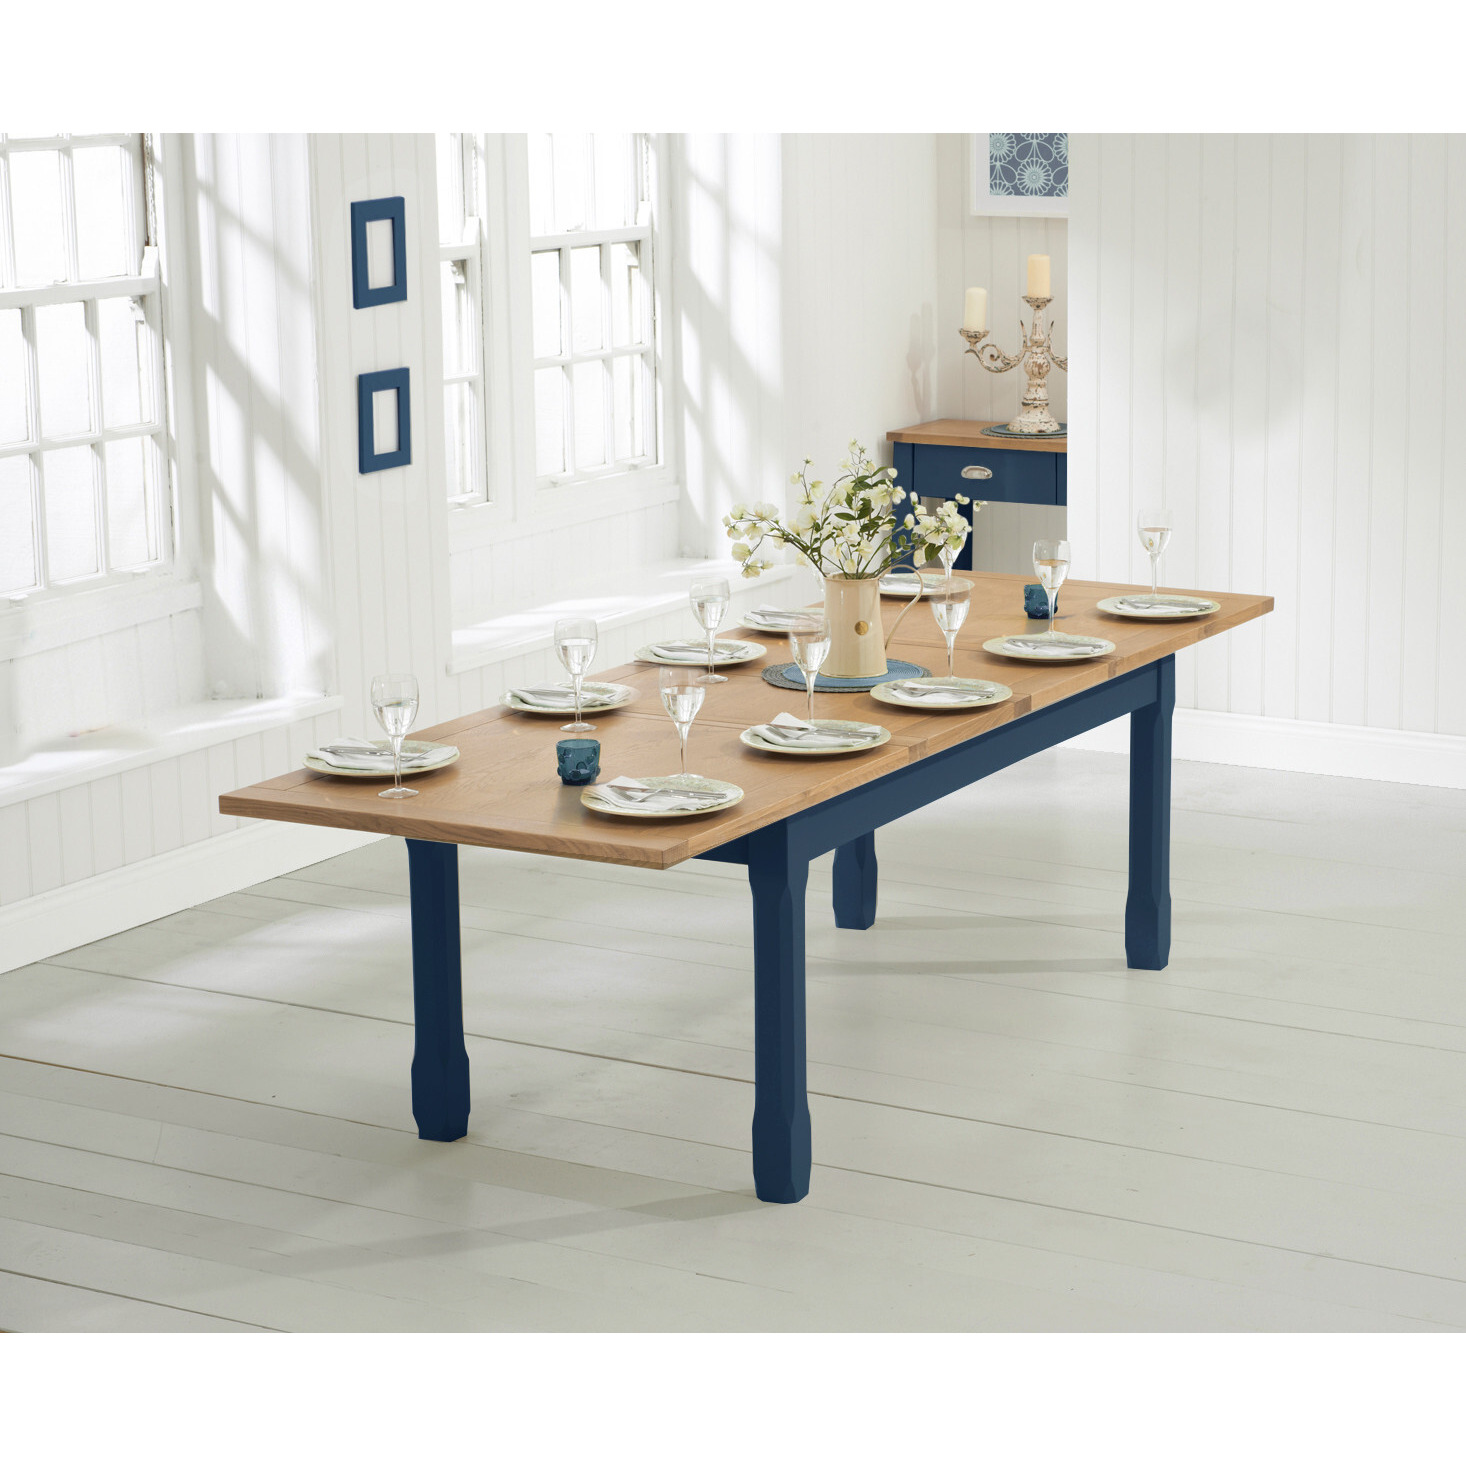 Somerset 180cm Oak and Blue Painted Extending Dining Table